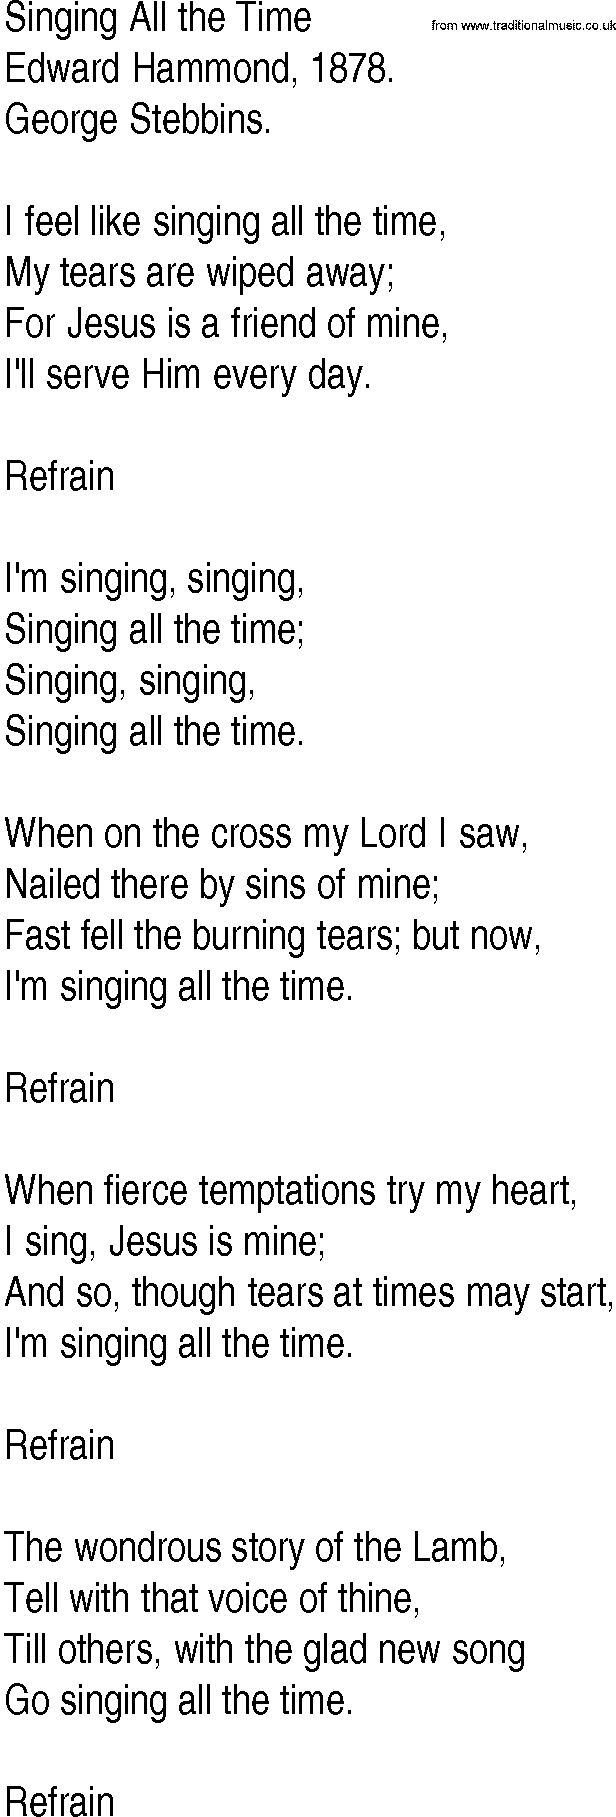 Hymn and Gospel Song: Singing All the Time by Edward Hammond lyrics